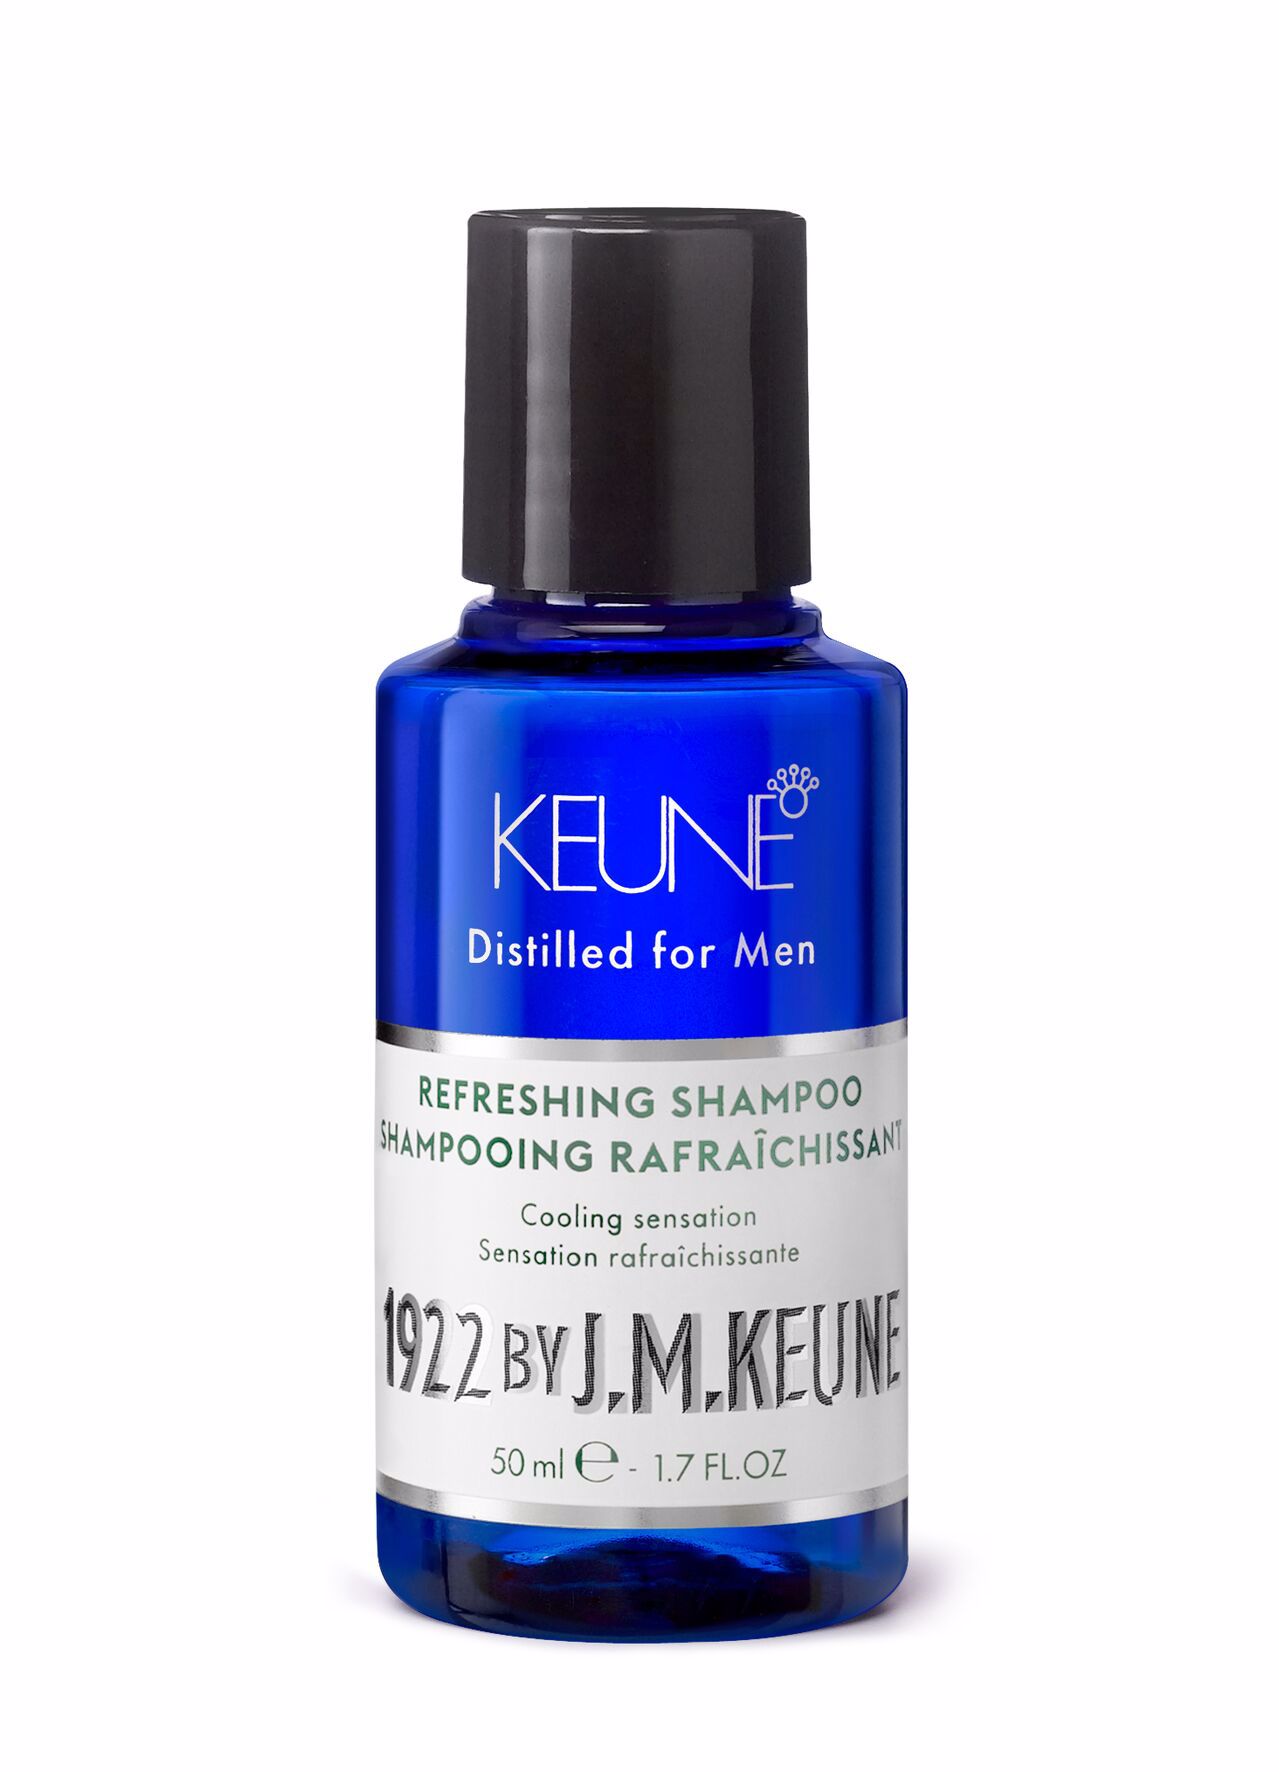 With our Refreshing Shampoo, you receive the ideal moisture hair care. Suitable for all hair types, it strengthens the hair with creatine and invigorates the scalp. Available on keune.ch.